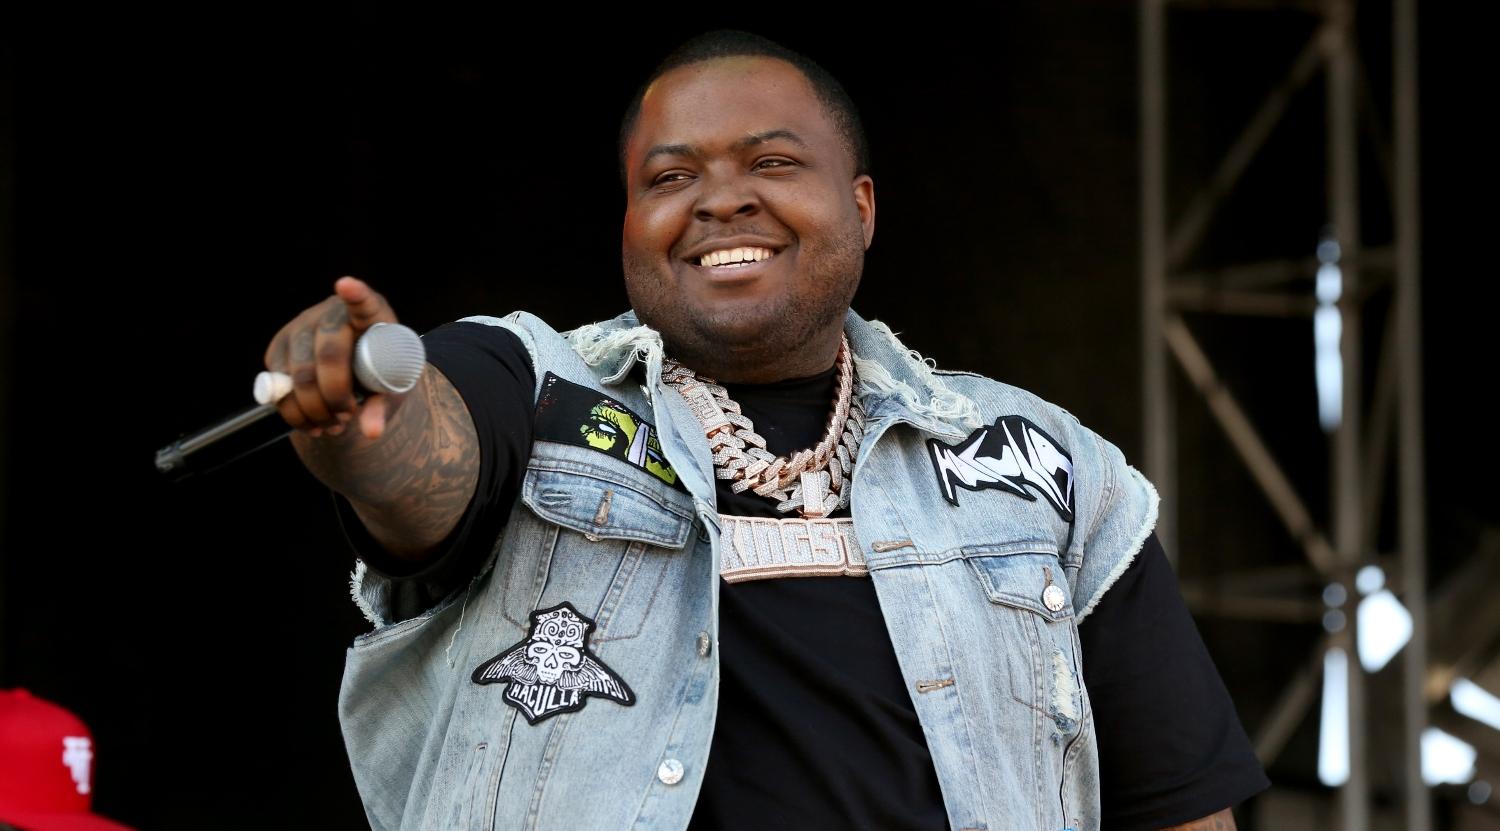 Sean Kingston performs at the 2022 Lovers & Friends music festival